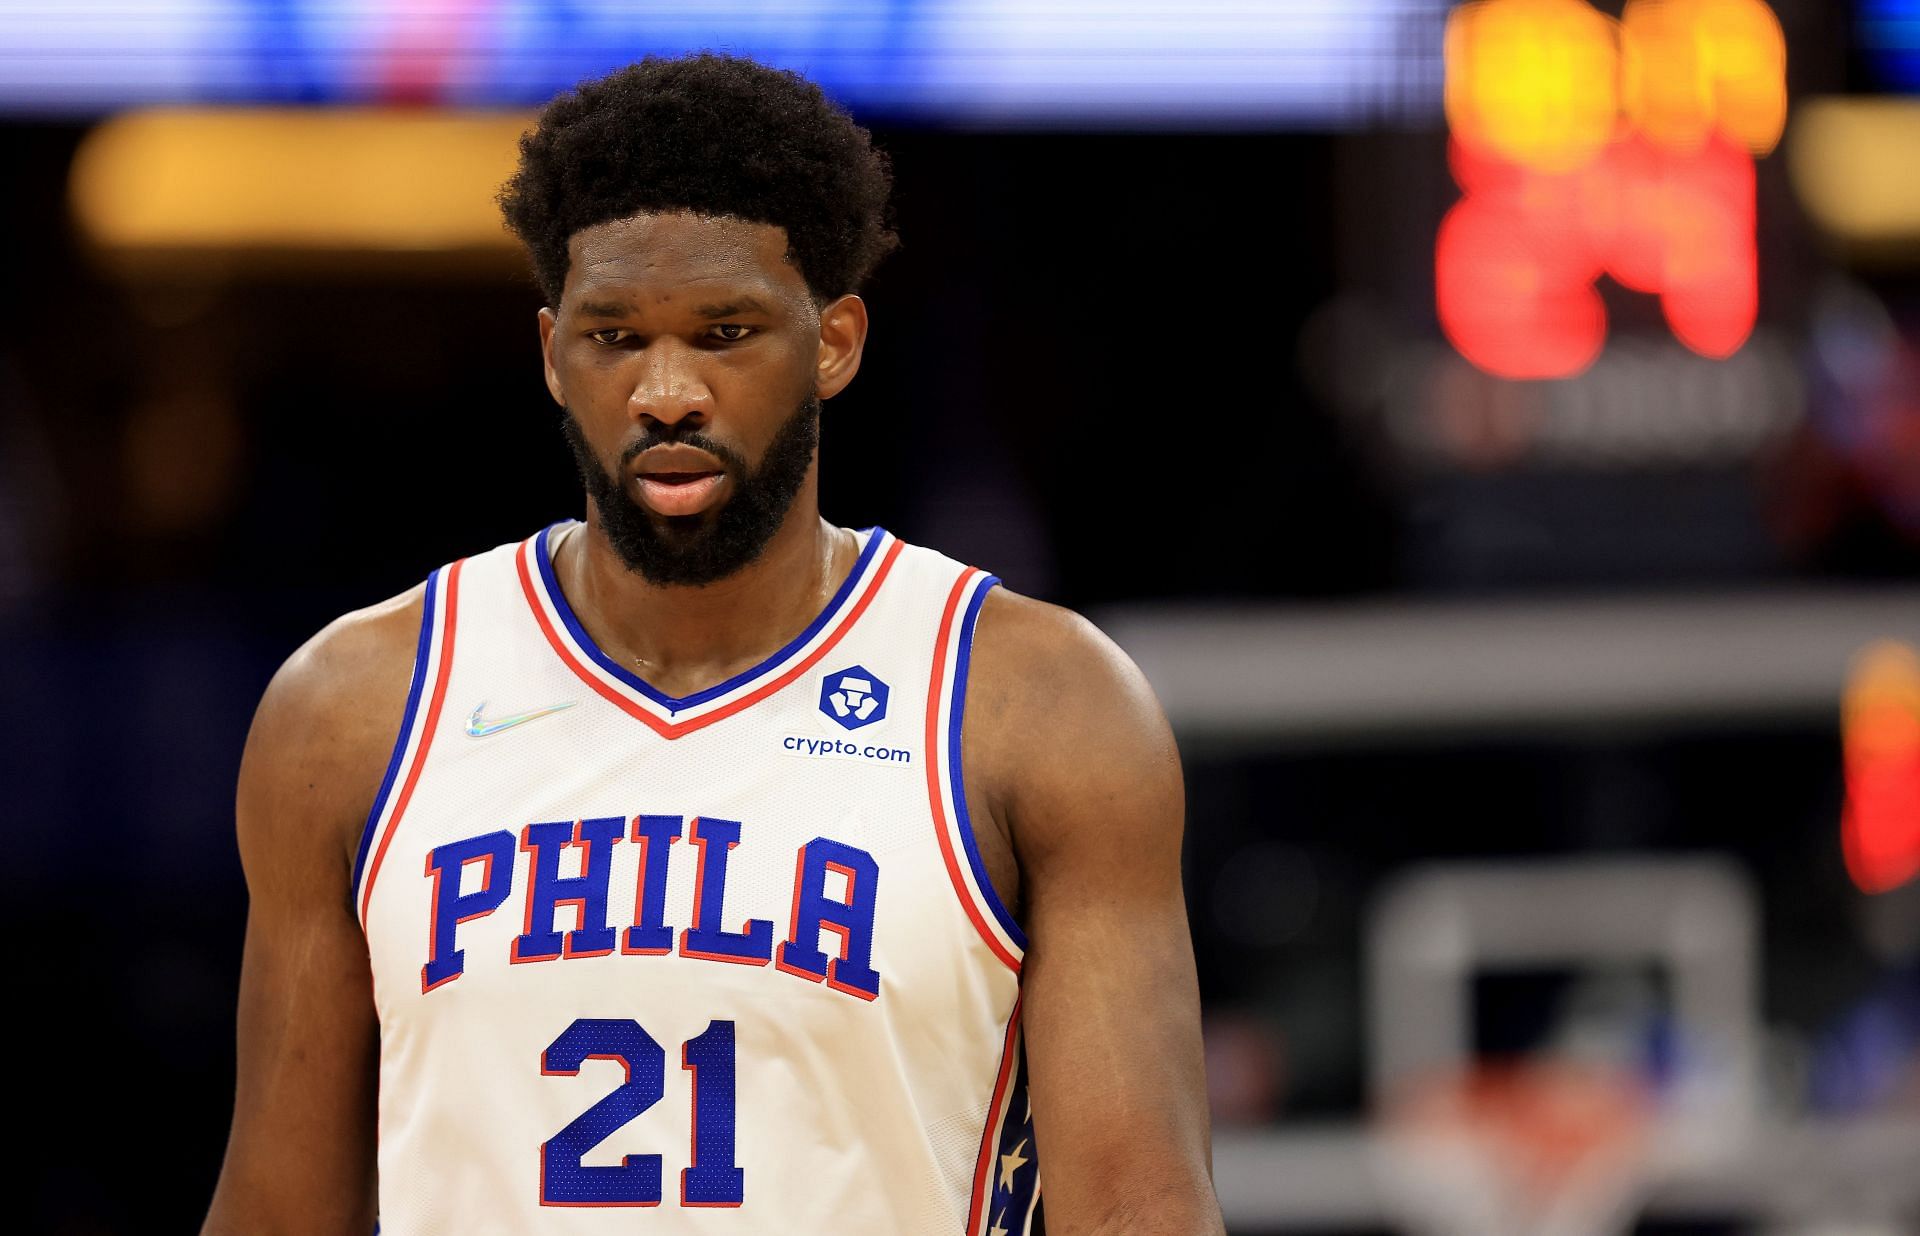 Joel Embiid will share the court with James Harden, against the Timberwolves